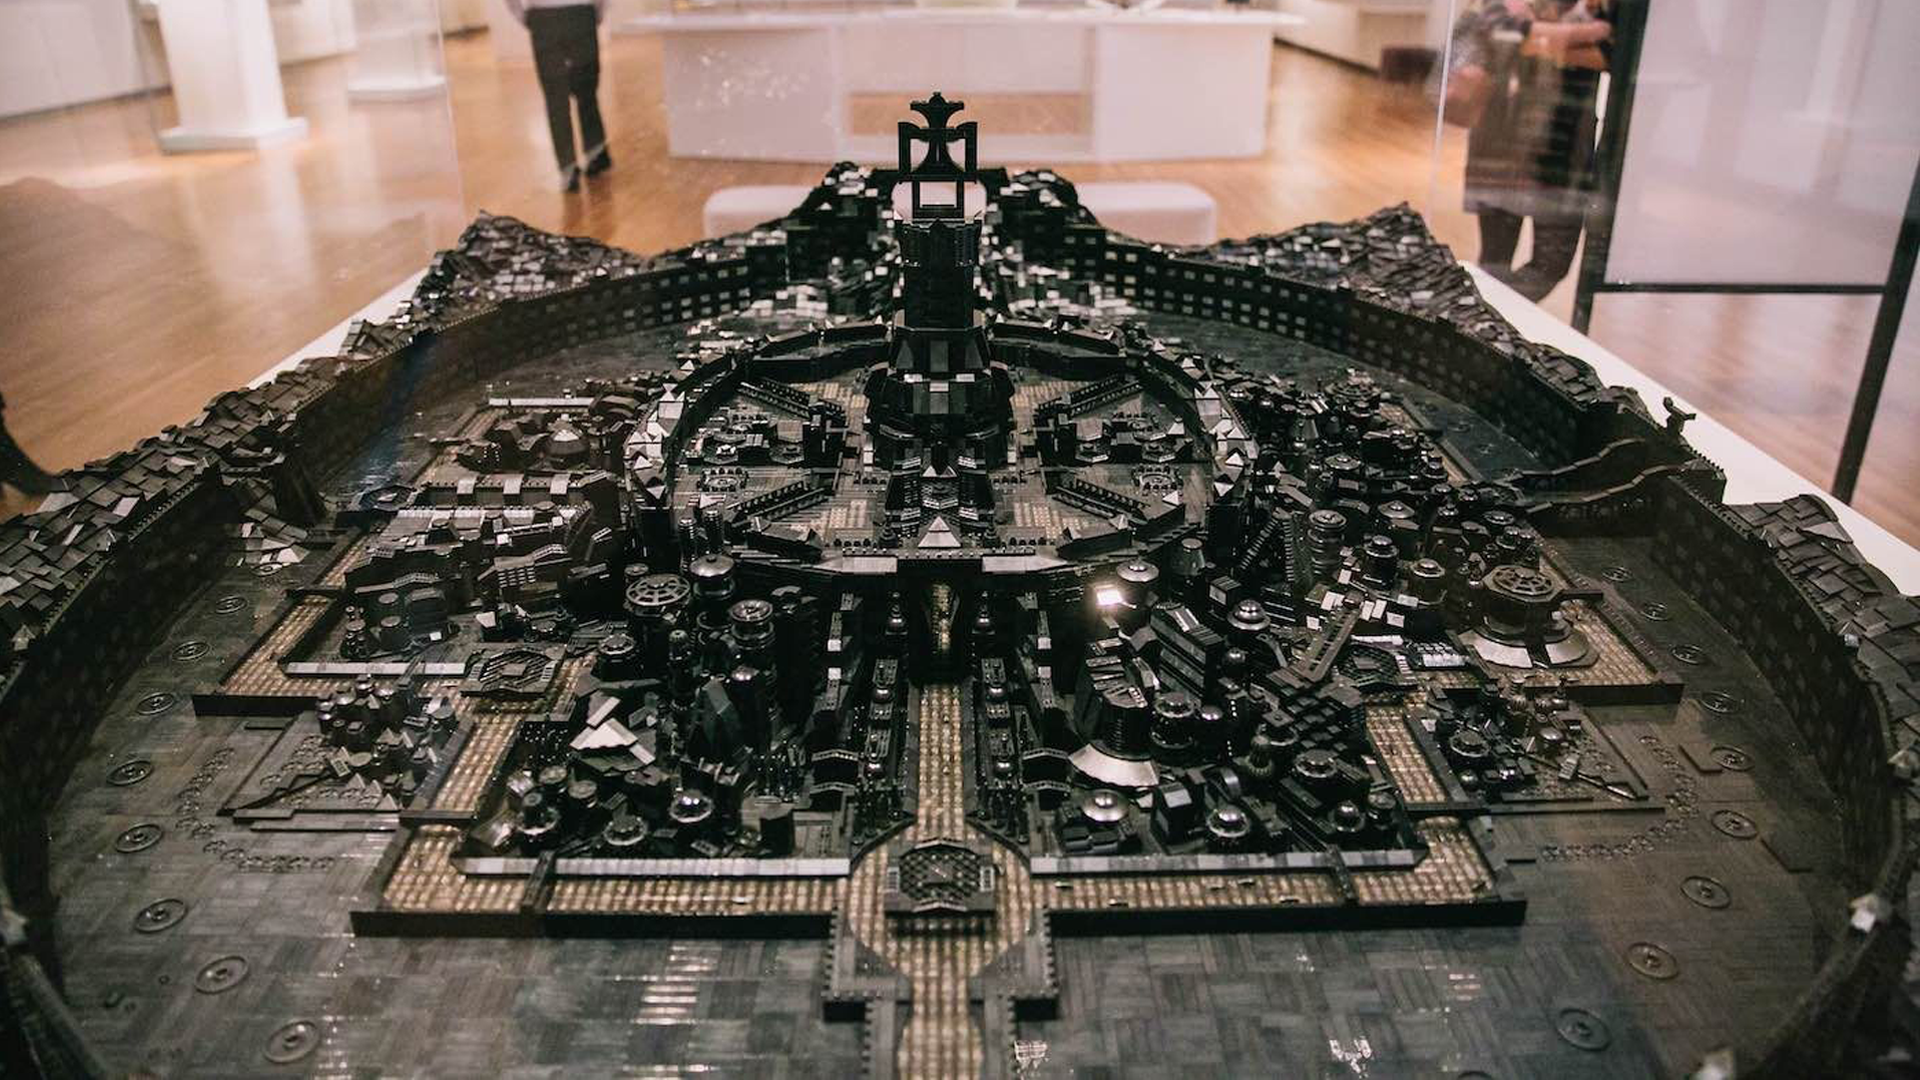 This 100,000-Part LEGO Sculpture Depicts a Reimagined African Metropolis